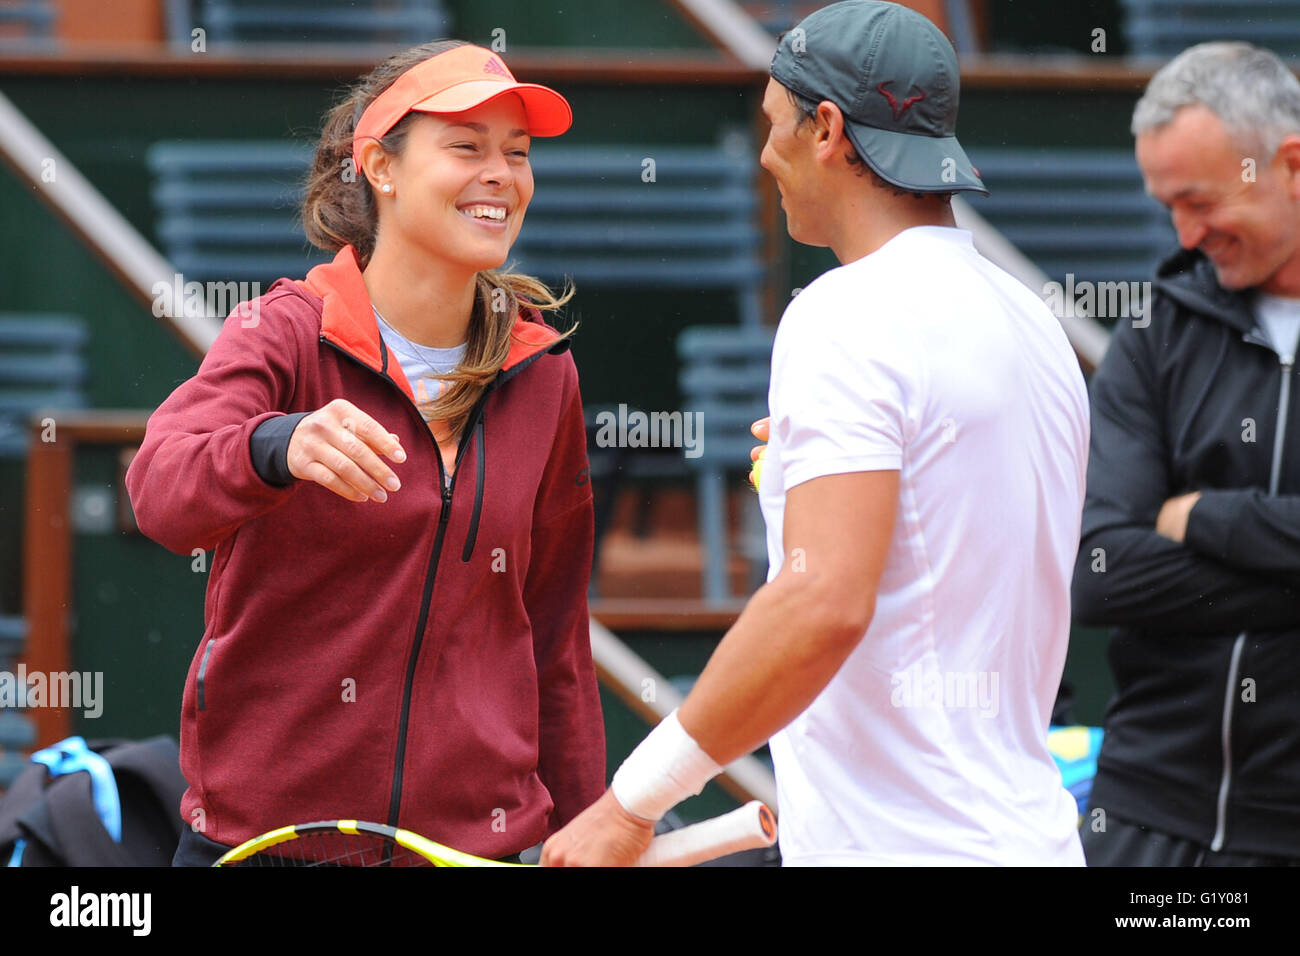 18.05.2016. Roland Garros stadium, Paris, France. French Open tennis championships. Players arrive for practise and qualifying days. Rafael Nadal (Esp) greets Ana Ivanovic (ser) Stock Photo